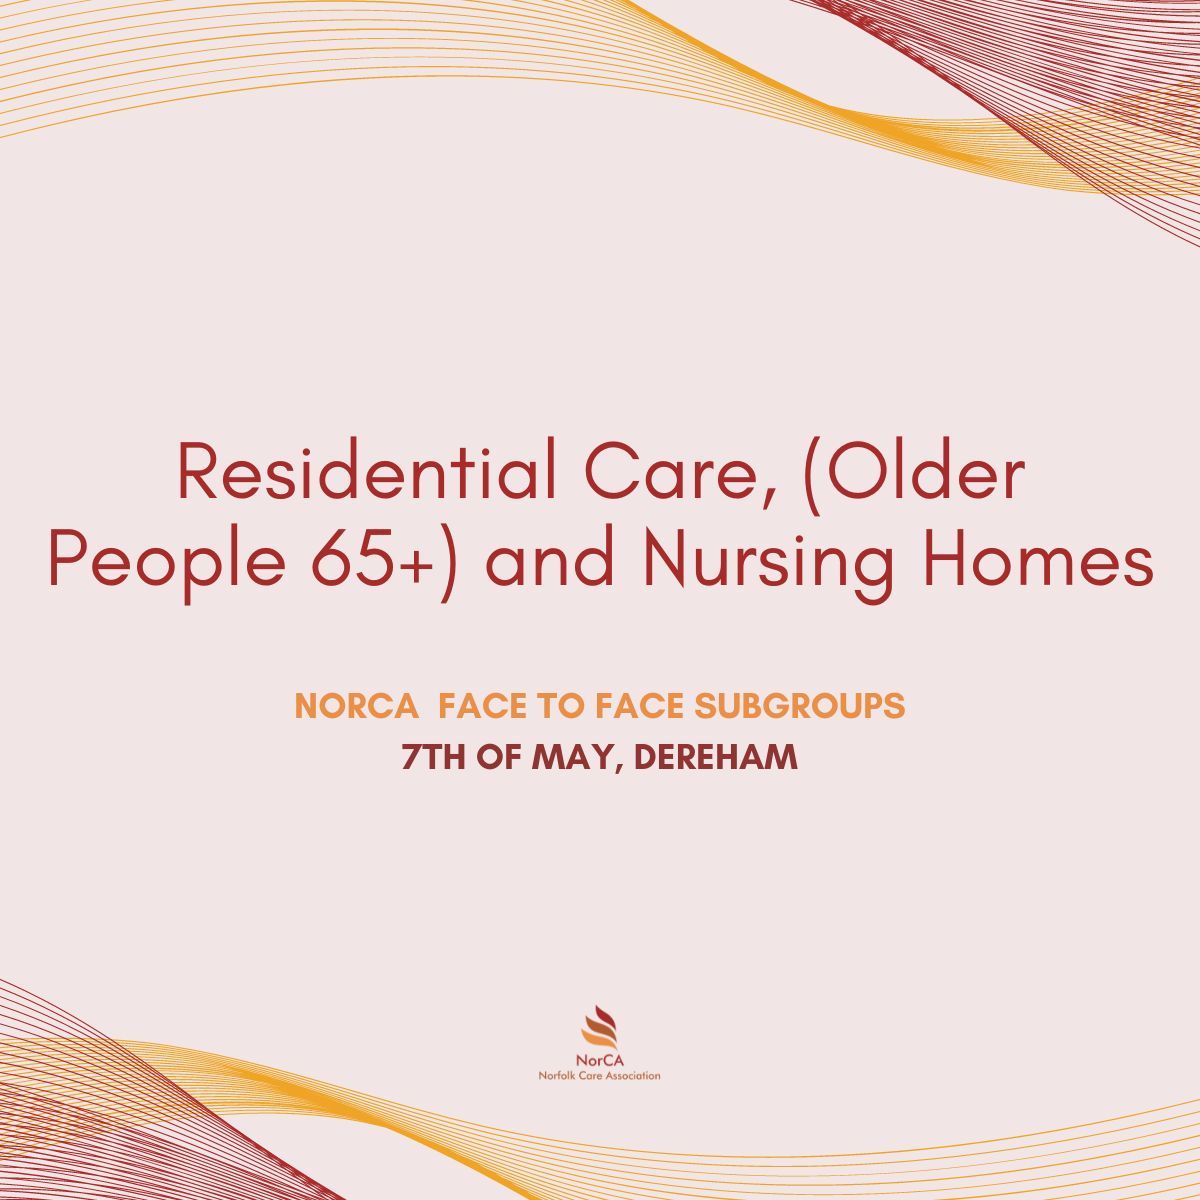 Register for our upcoming face to face subgroup!

Join us in Dereham on the 7th of May and secure your place by registering here - buff.ly/4dfcPQQ 

#socialcare #residentialcare #carehomes #celebratesocialcare #norca